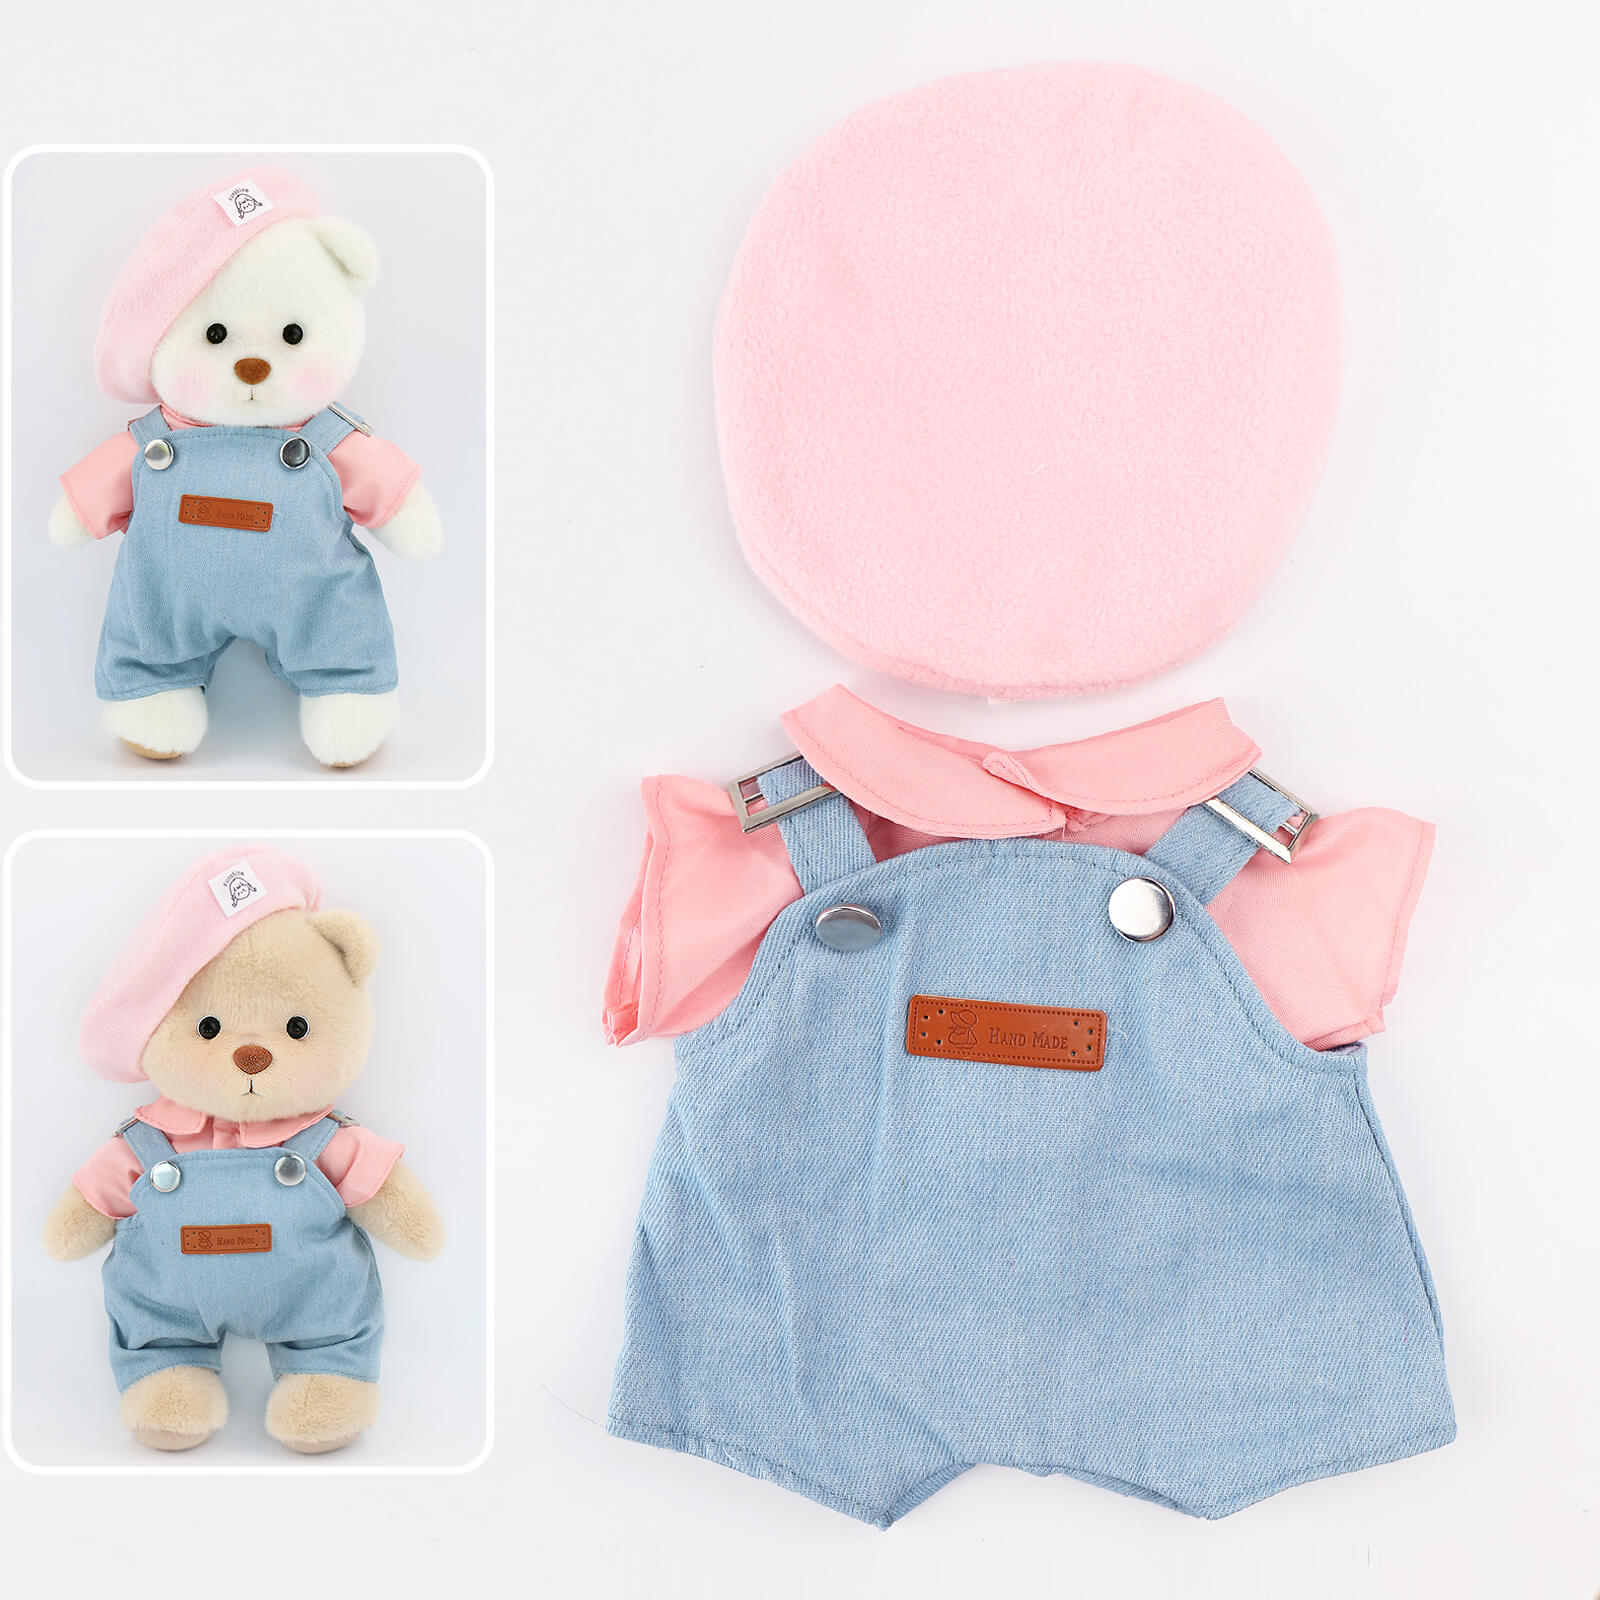 Beddingset.vip-Bedding Bear Outfits-Pink Beanie Denim Overalls Set of Three(Outfit Only) | Teddy Bear Clothes